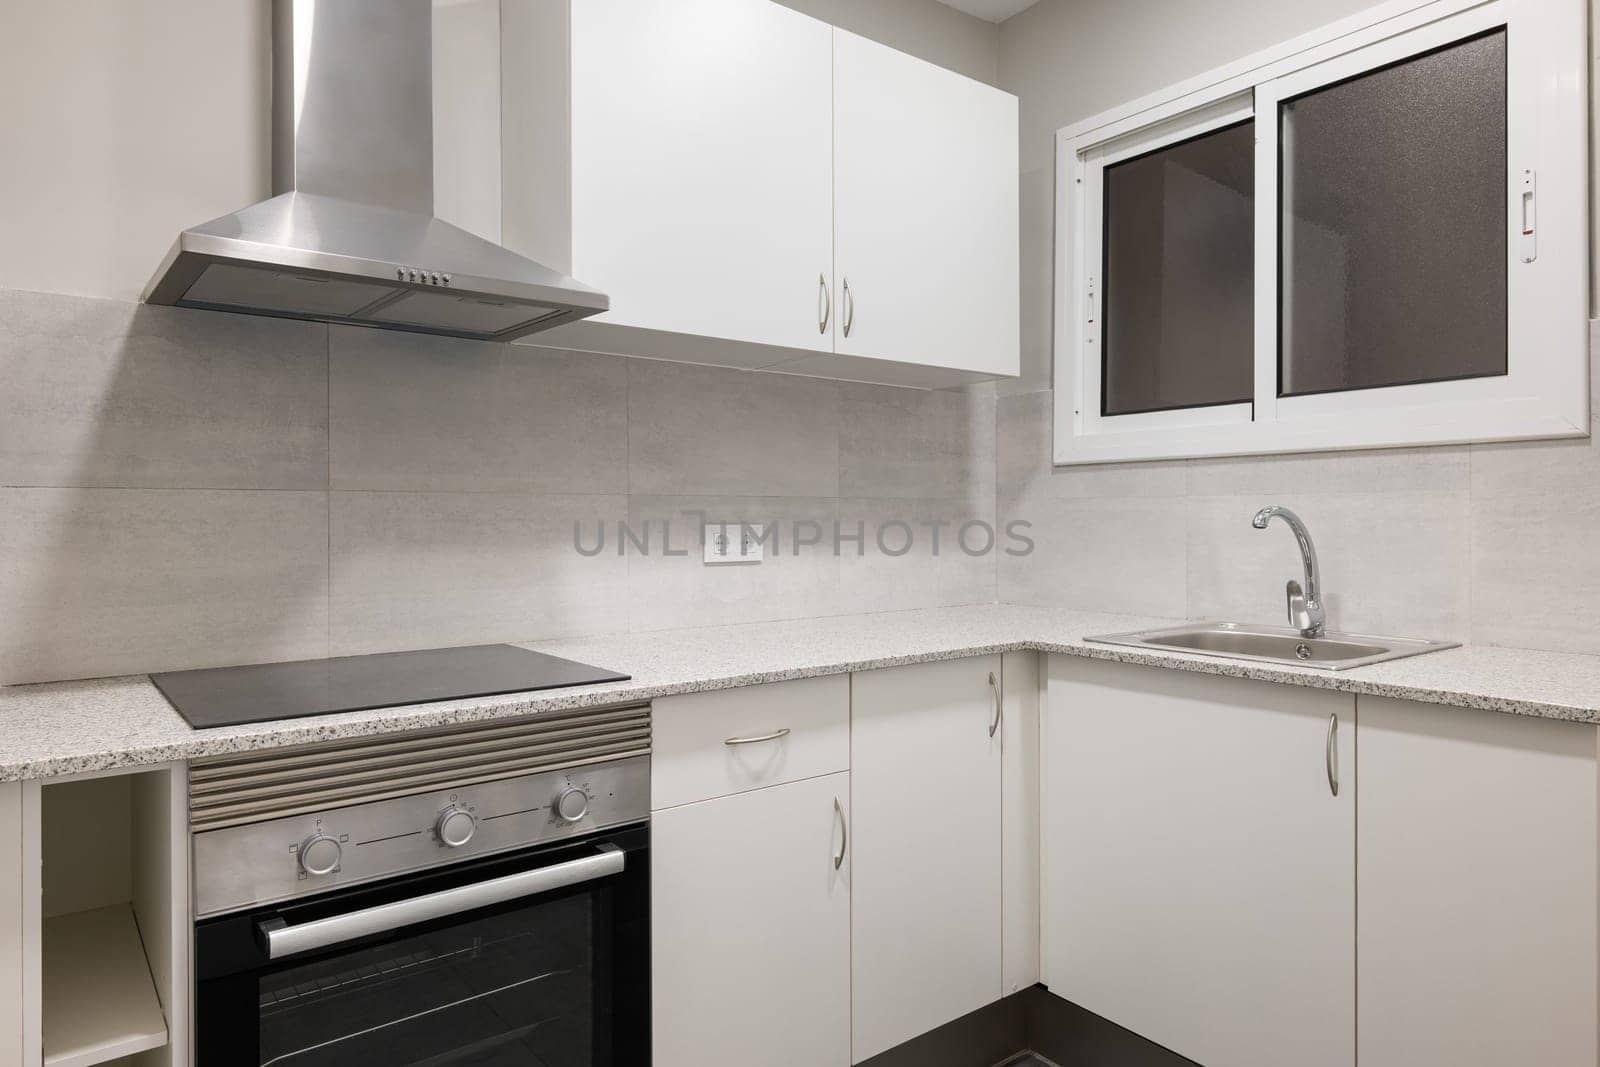 Bright and contemporary kitchen with sleek white cabinets, stainless steel appliances, and clean countertops. Includes electric stove, oven, and minimalist design.